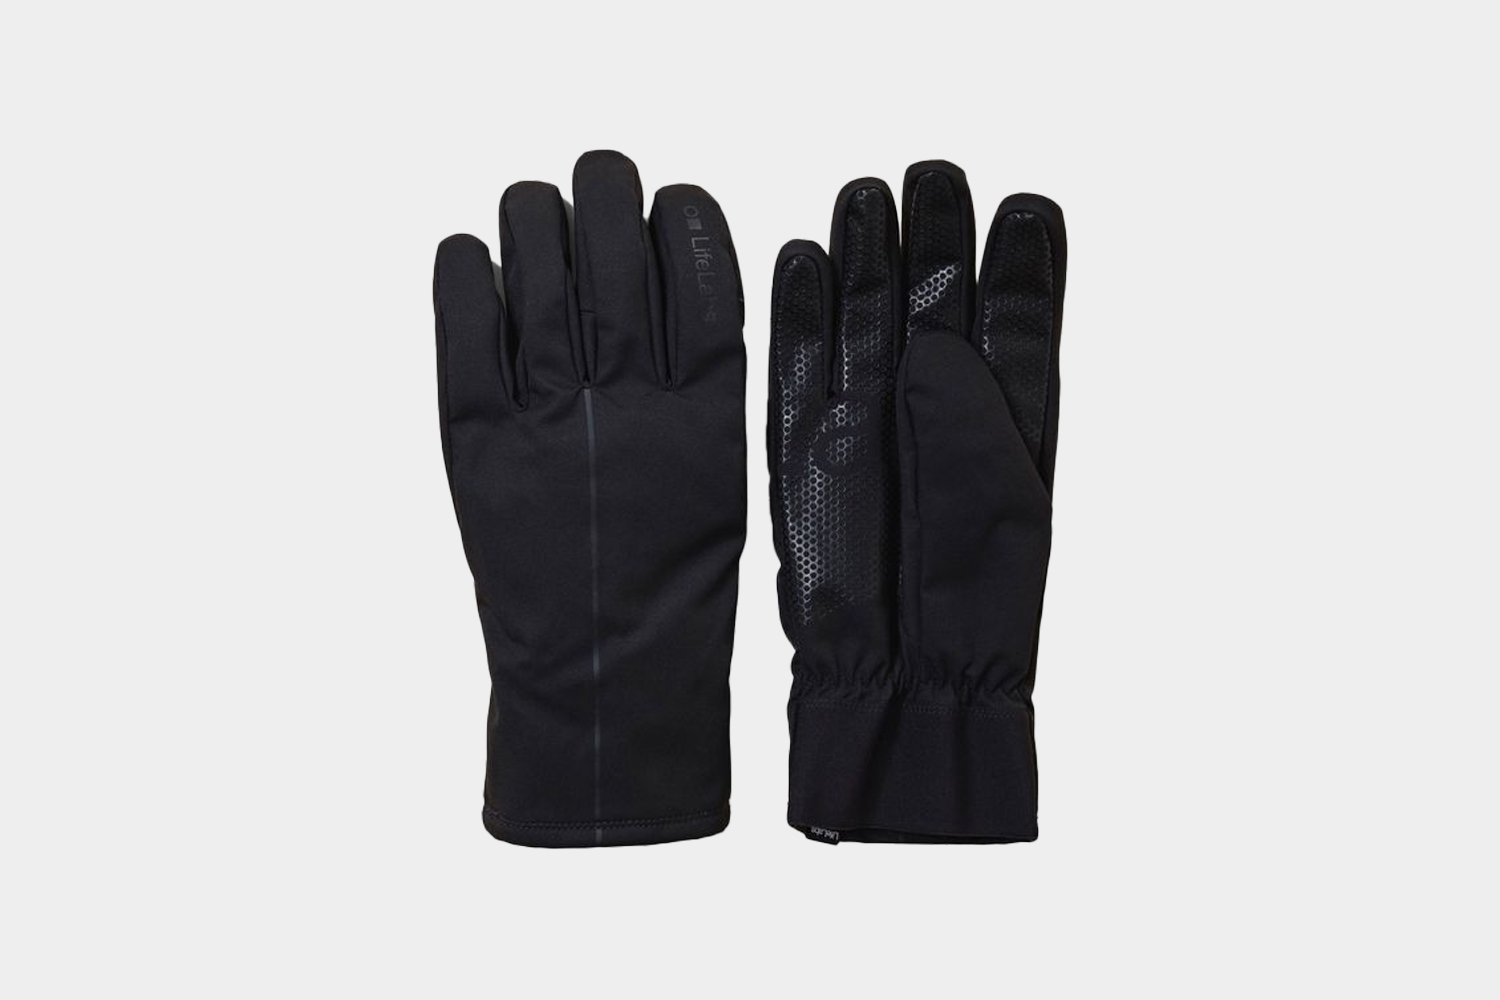 The LifeLabs WarmLife Glove in black with textured gripping on the palms